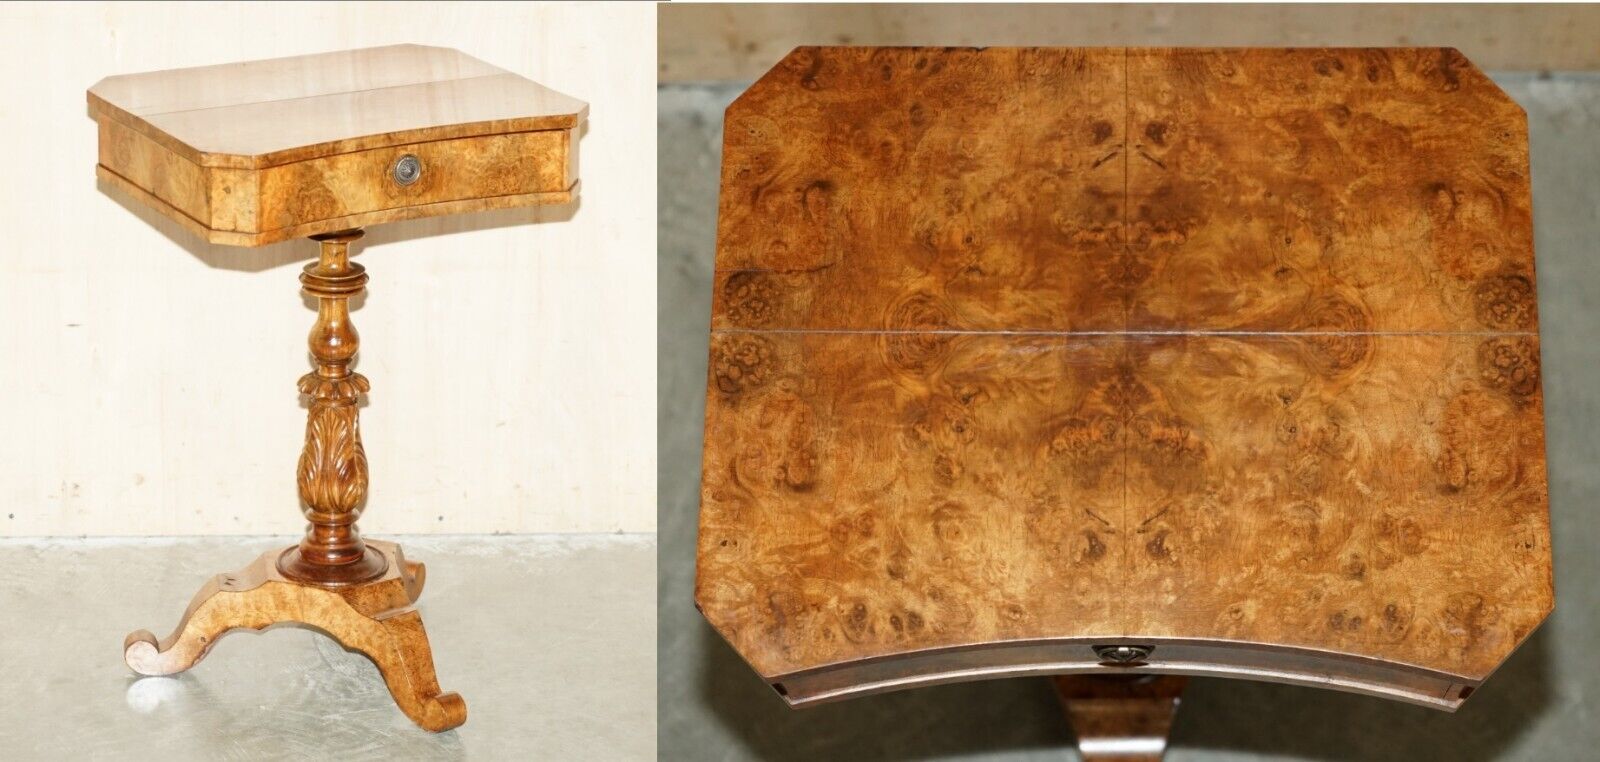 EXQUISITE QUALITY WILLIAM IV CIRCA 1830 BURR WALNUT SIDE END WORK SEWING TABLE